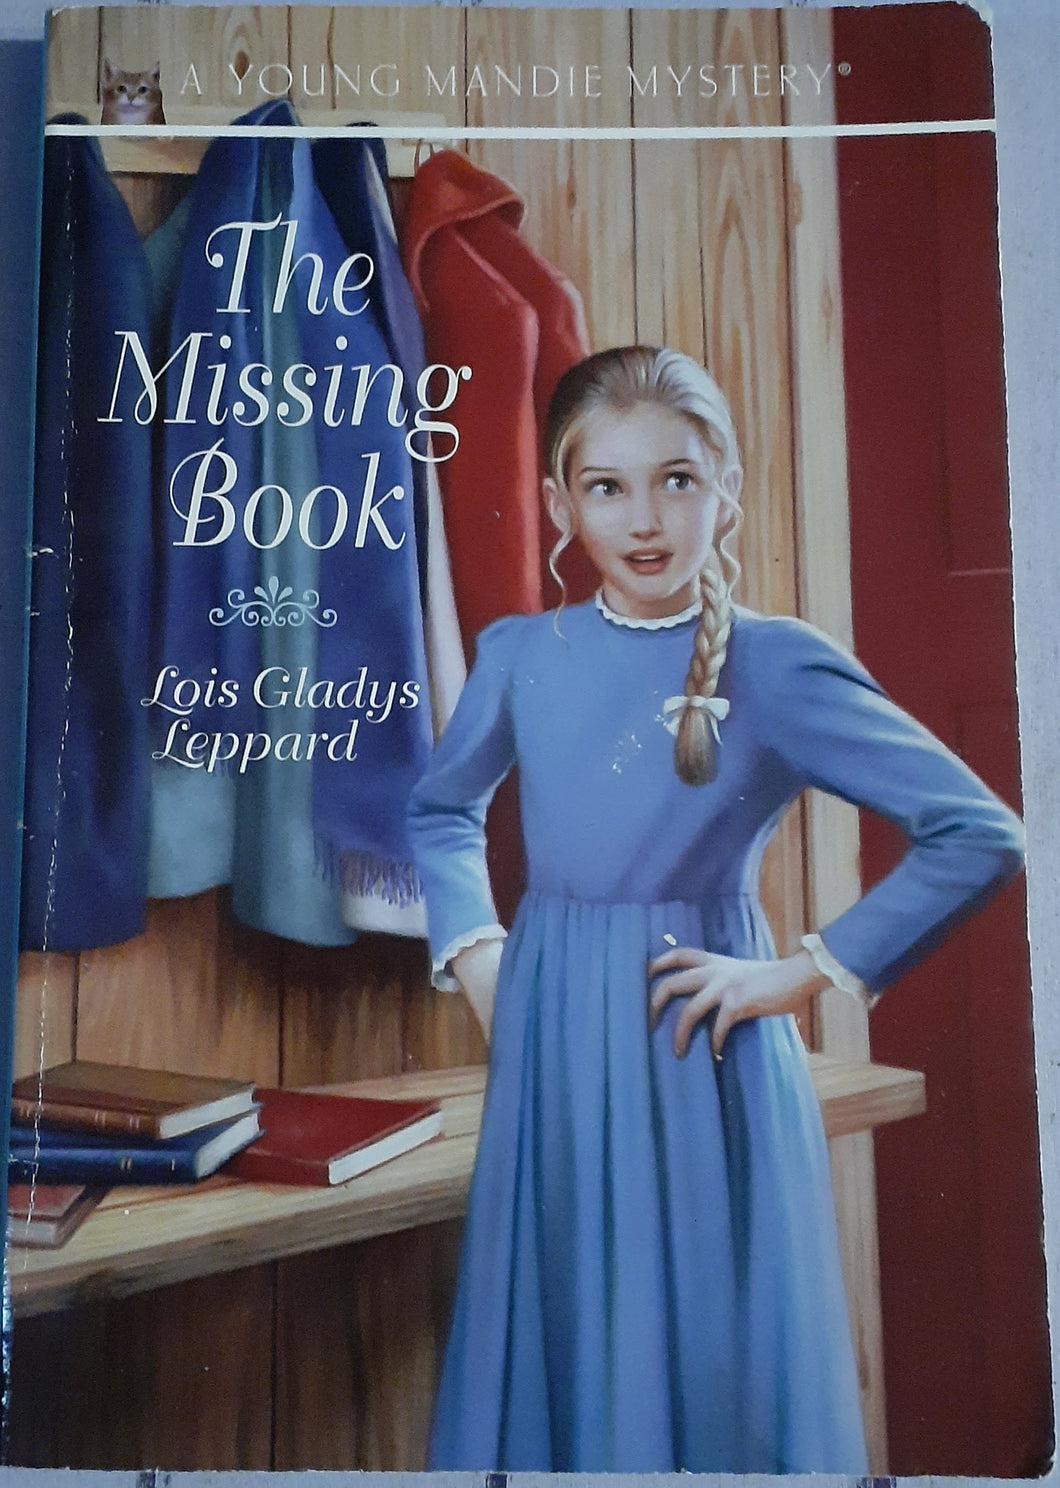 A Young Mandie Mystery - The Missing Book